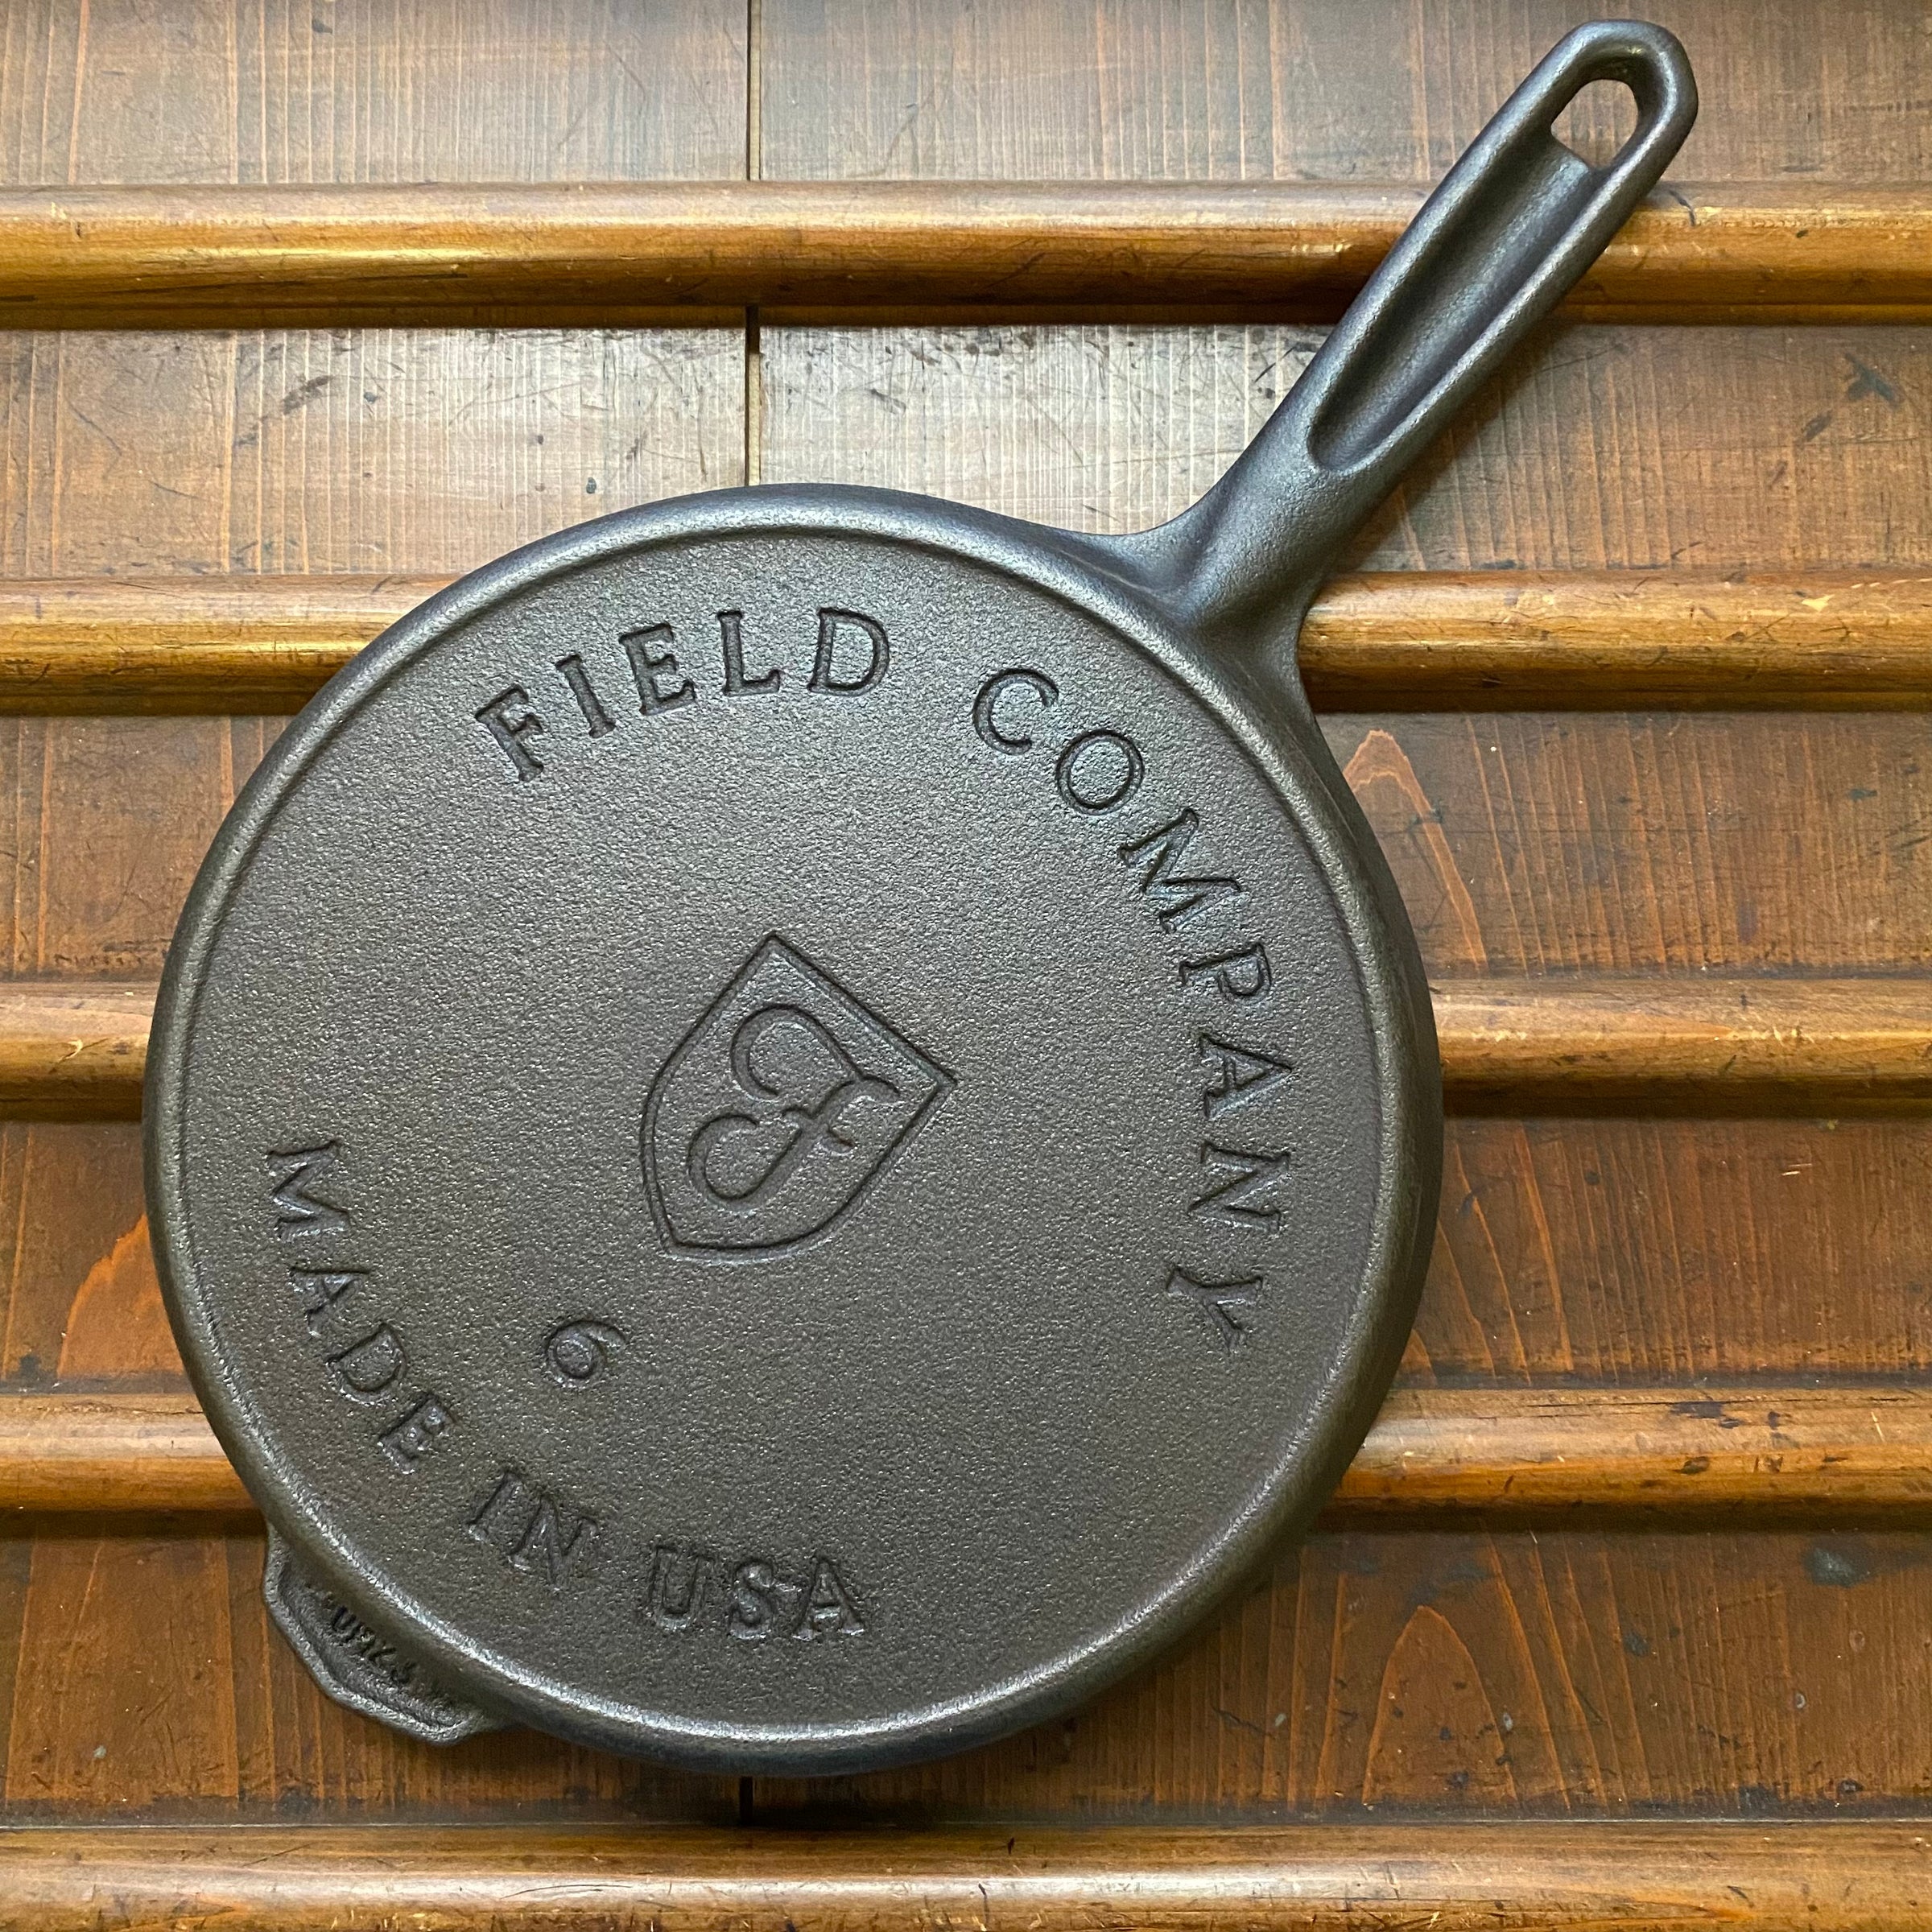 Field Company Cast Iron Skillet Follow Up Review 